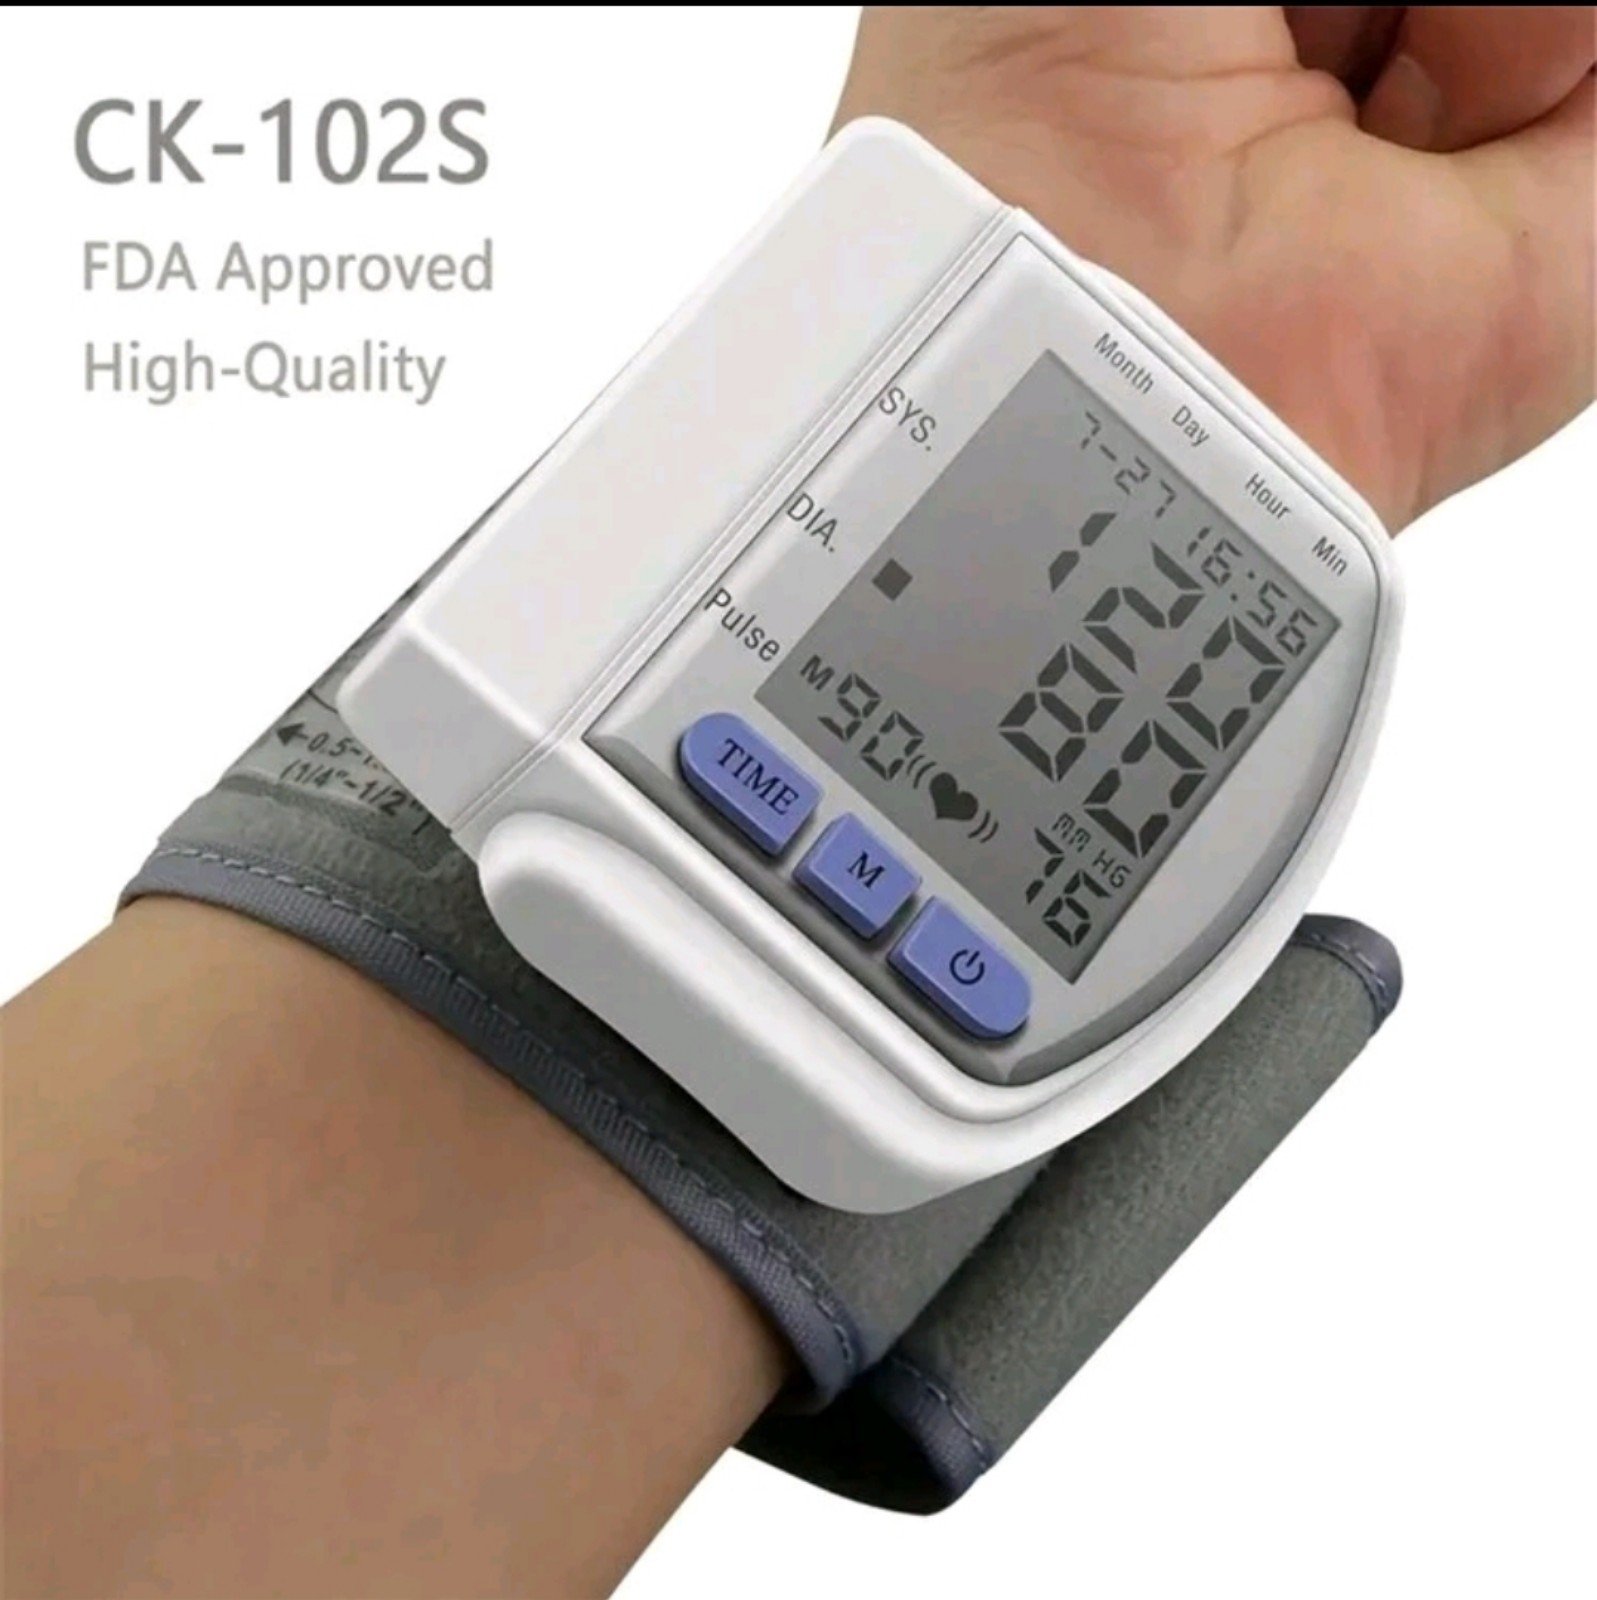 Wrist Blood Pressure Monitor With Voice & Carrying Case FhwwSiDPE